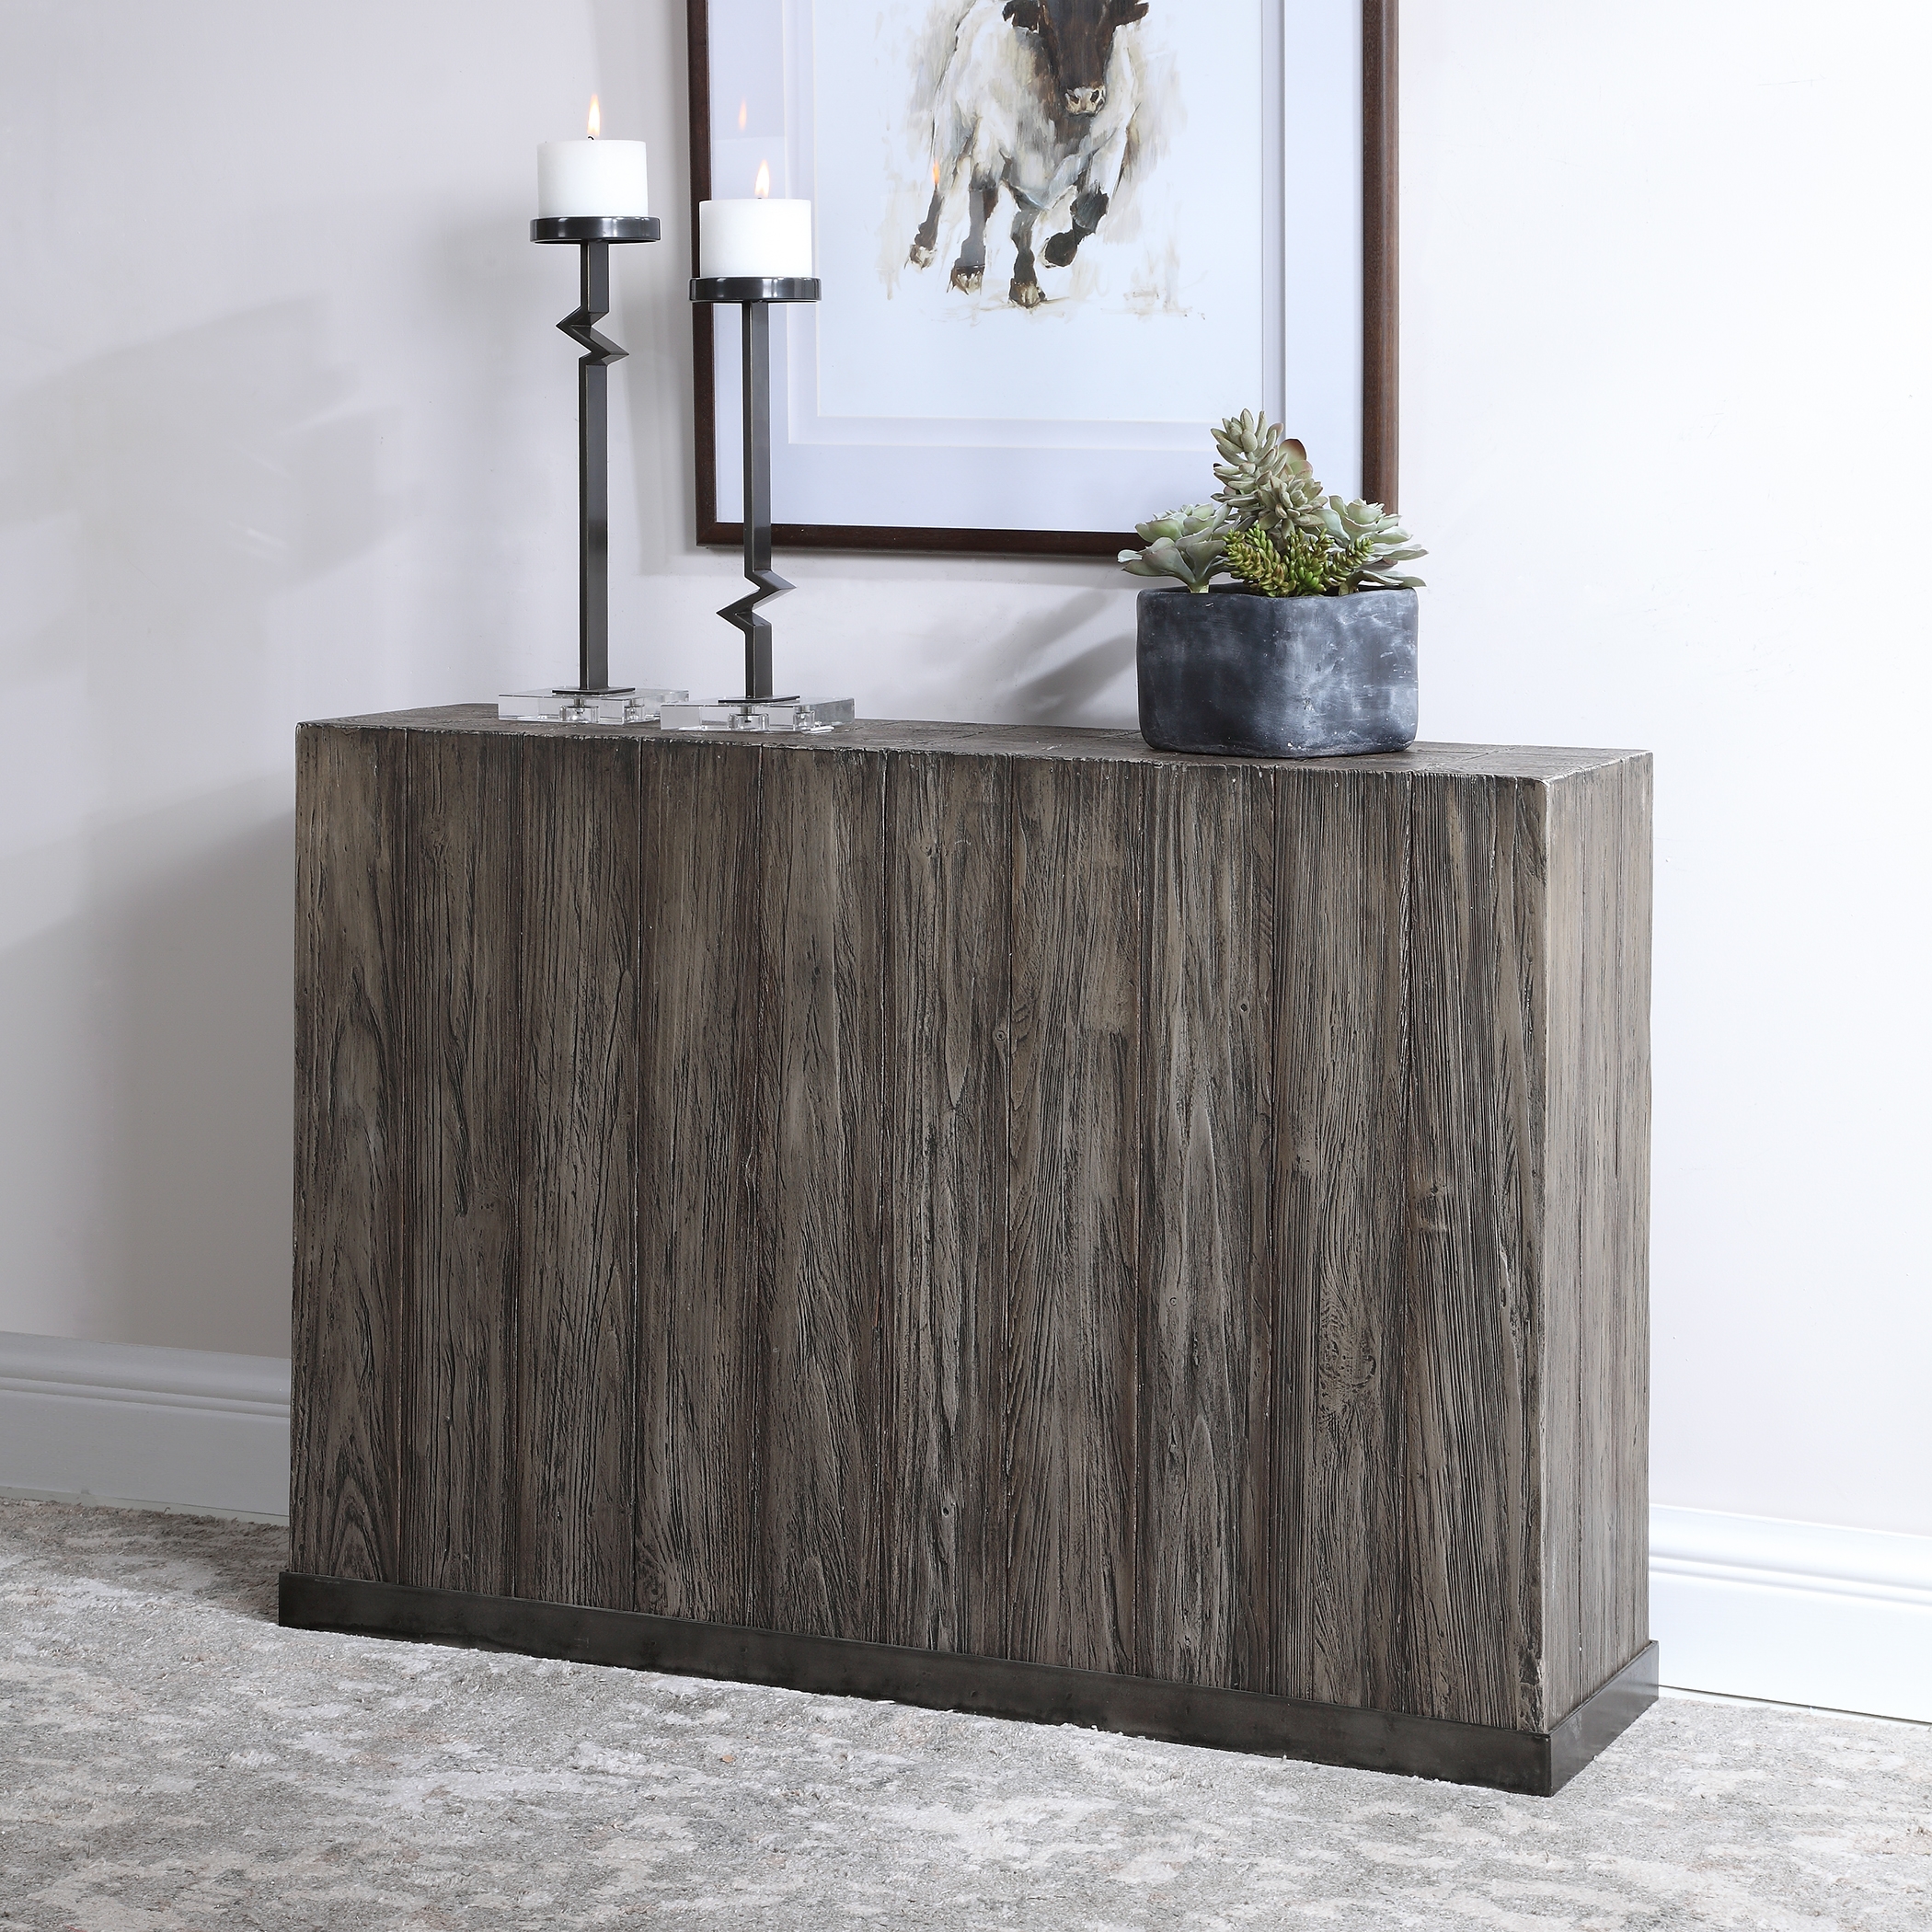 Latham Reclaimed Wood Console Table - Image 1